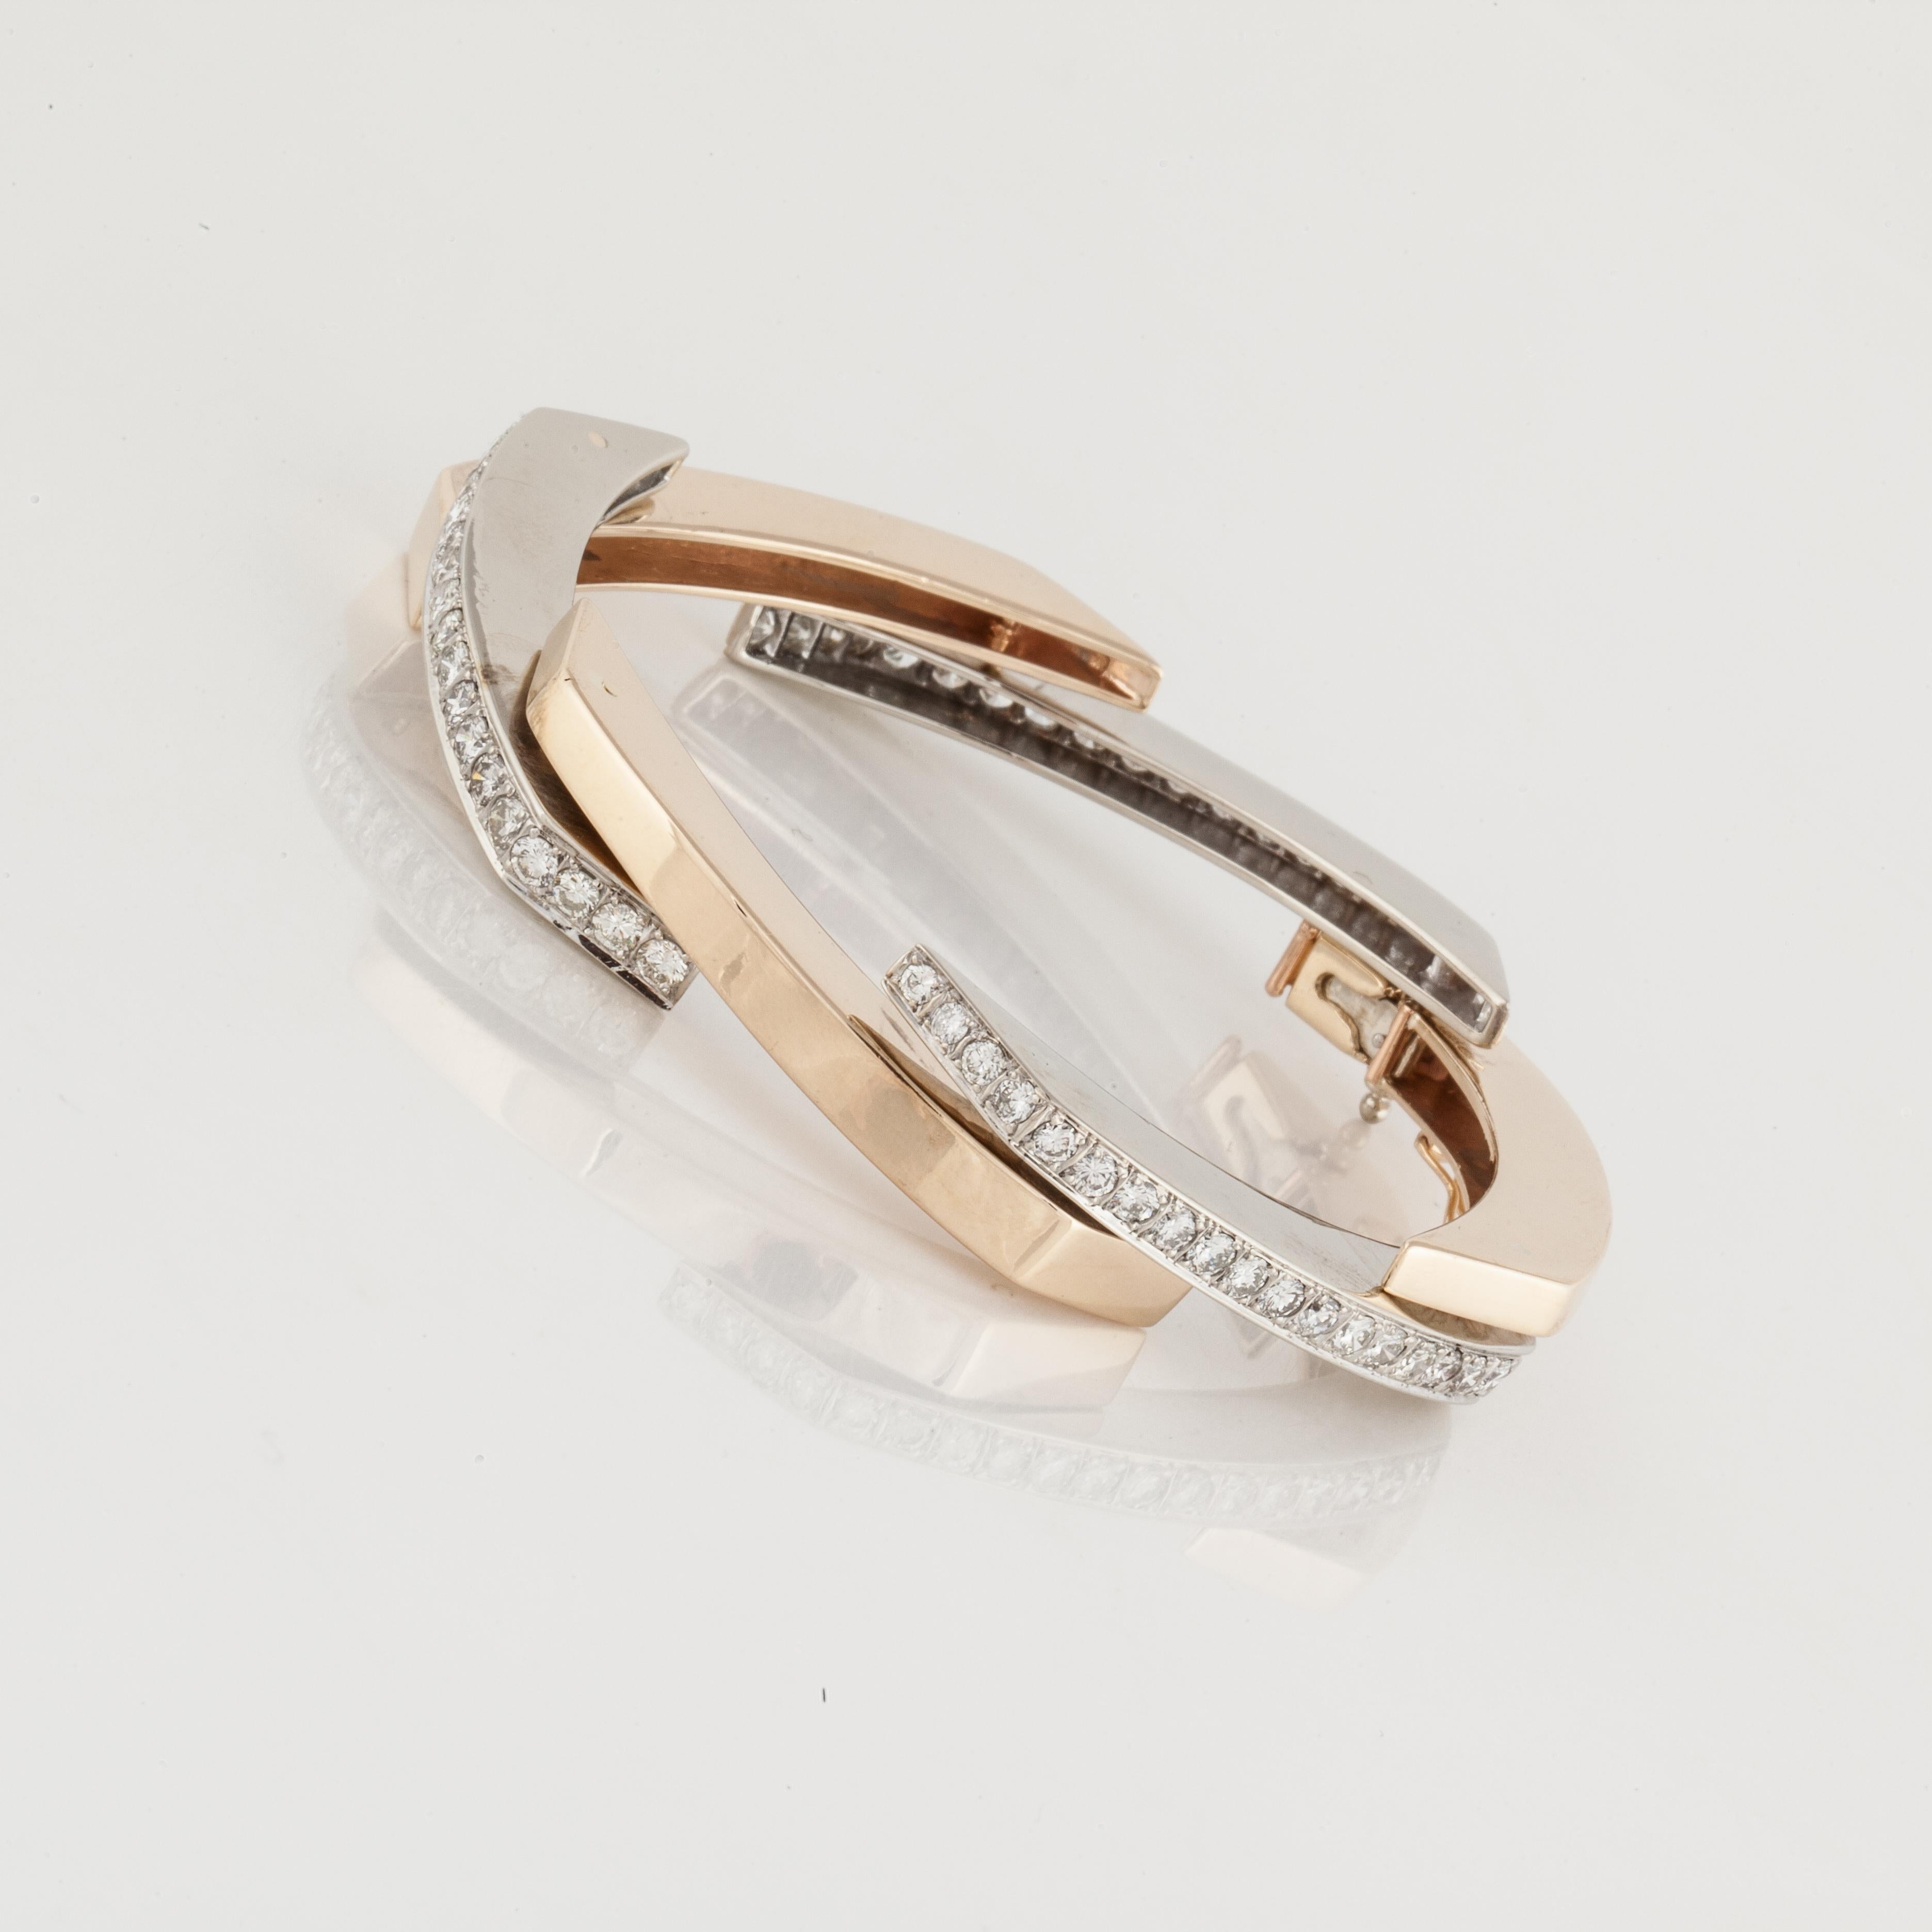 14K gold bracelet in a modernistic design featuring alternating white gold and yellow gold elongated links with diamonds set into the white gold links.  There are 66 round diamonds totaling 4.80 carats; H-I color and VS clarity.  Bracelet measures 7